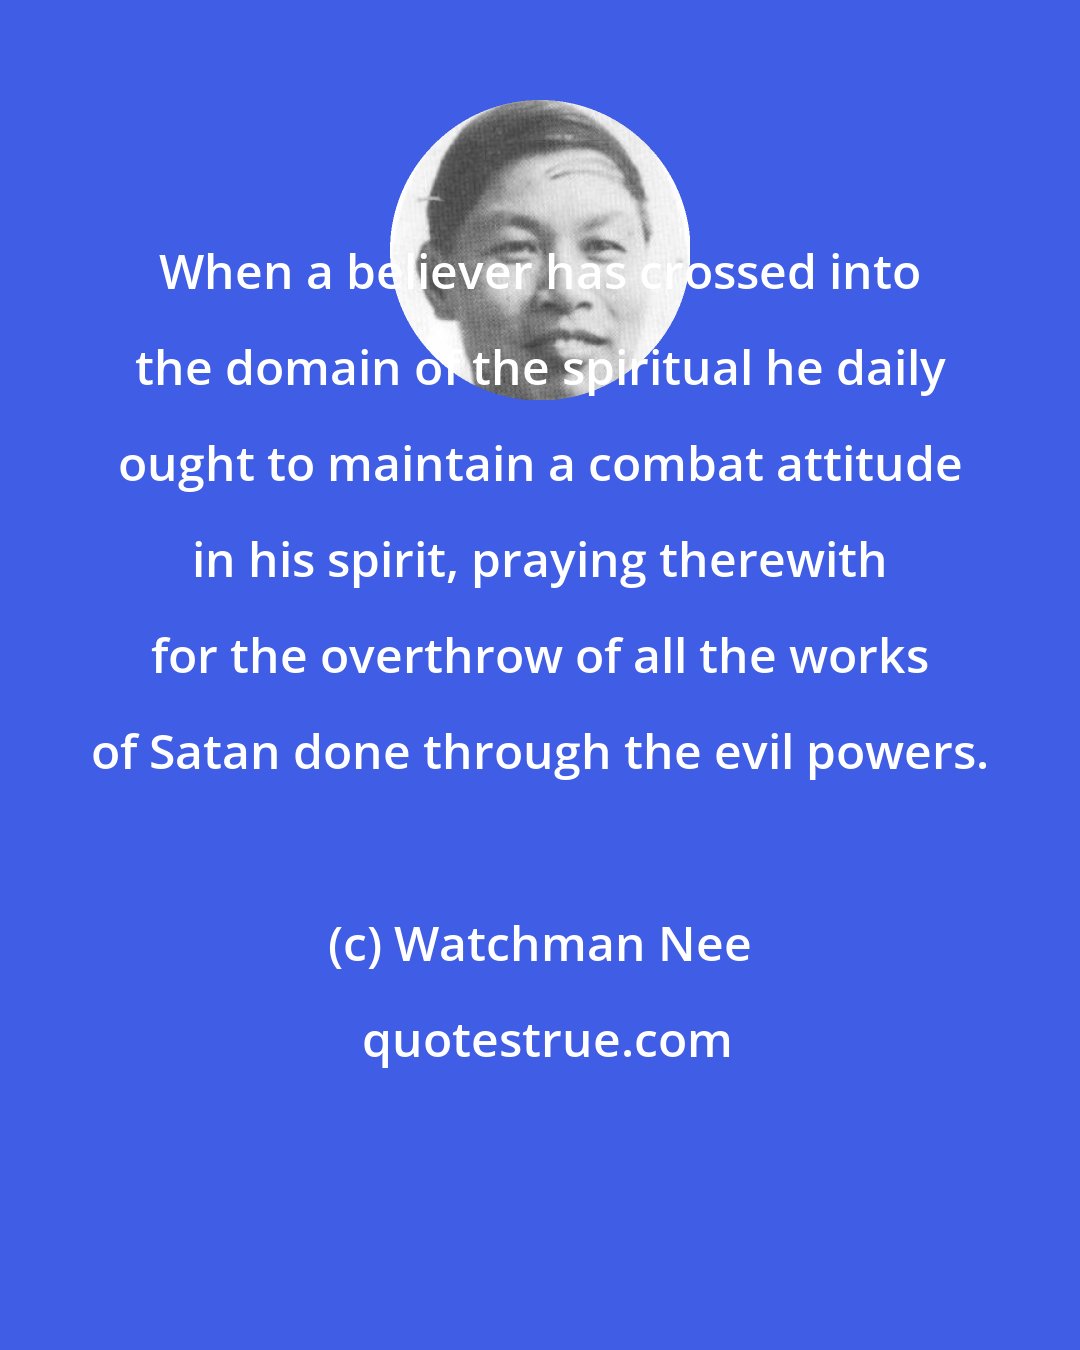 Watchman Nee: When a believer has crossed into the domain of the spiritual he daily ought to maintain a combat attitude in his spirit, praying therewith for the overthrow of all the works of Satan done through the evil powers.